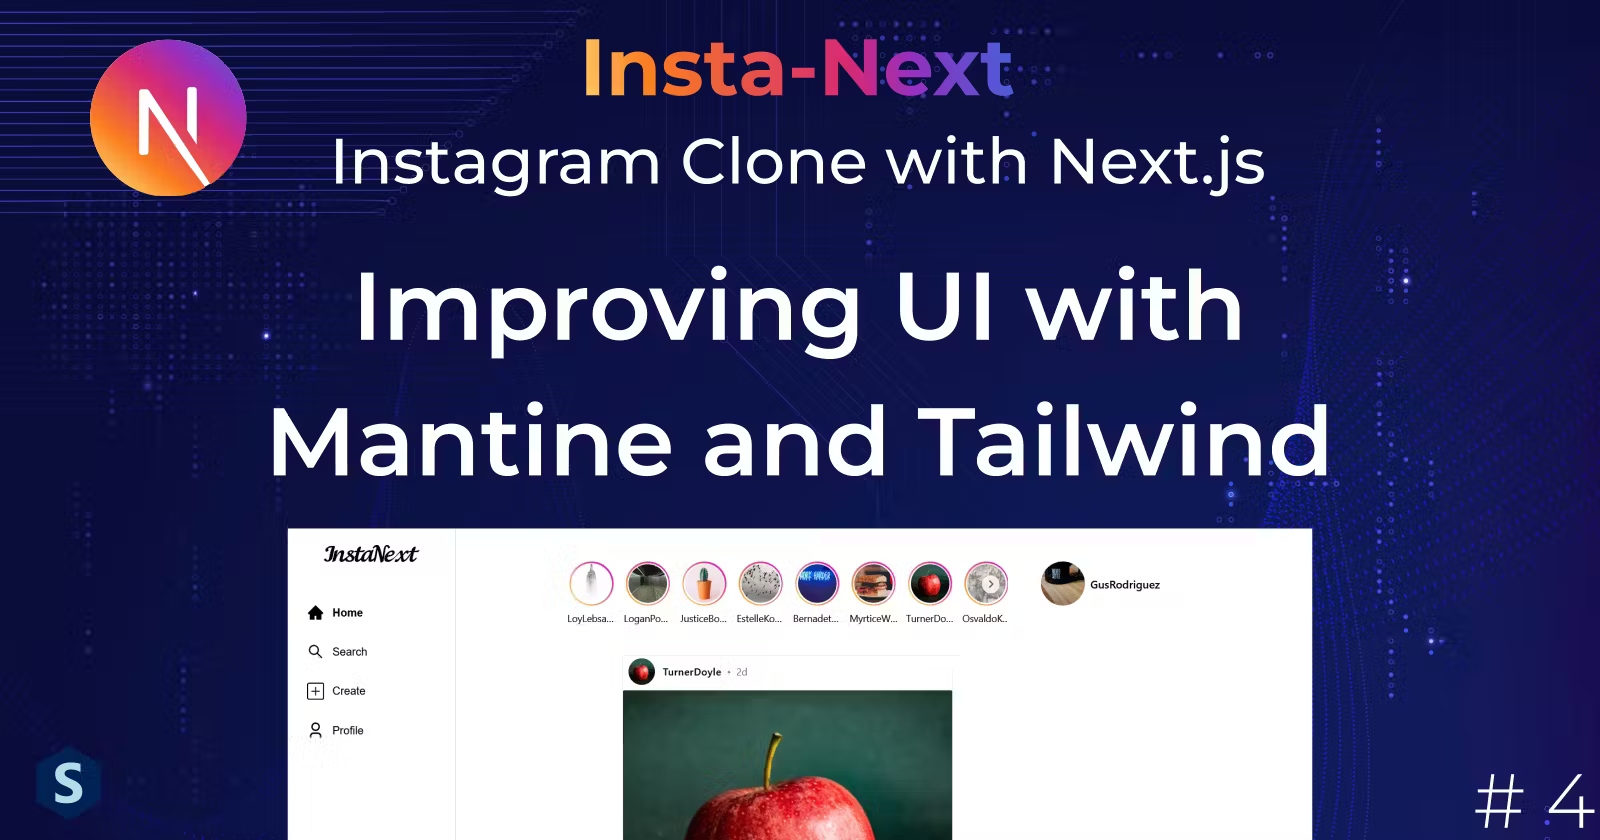 Insta-Next: Improving UI with Mantine and Tailwind